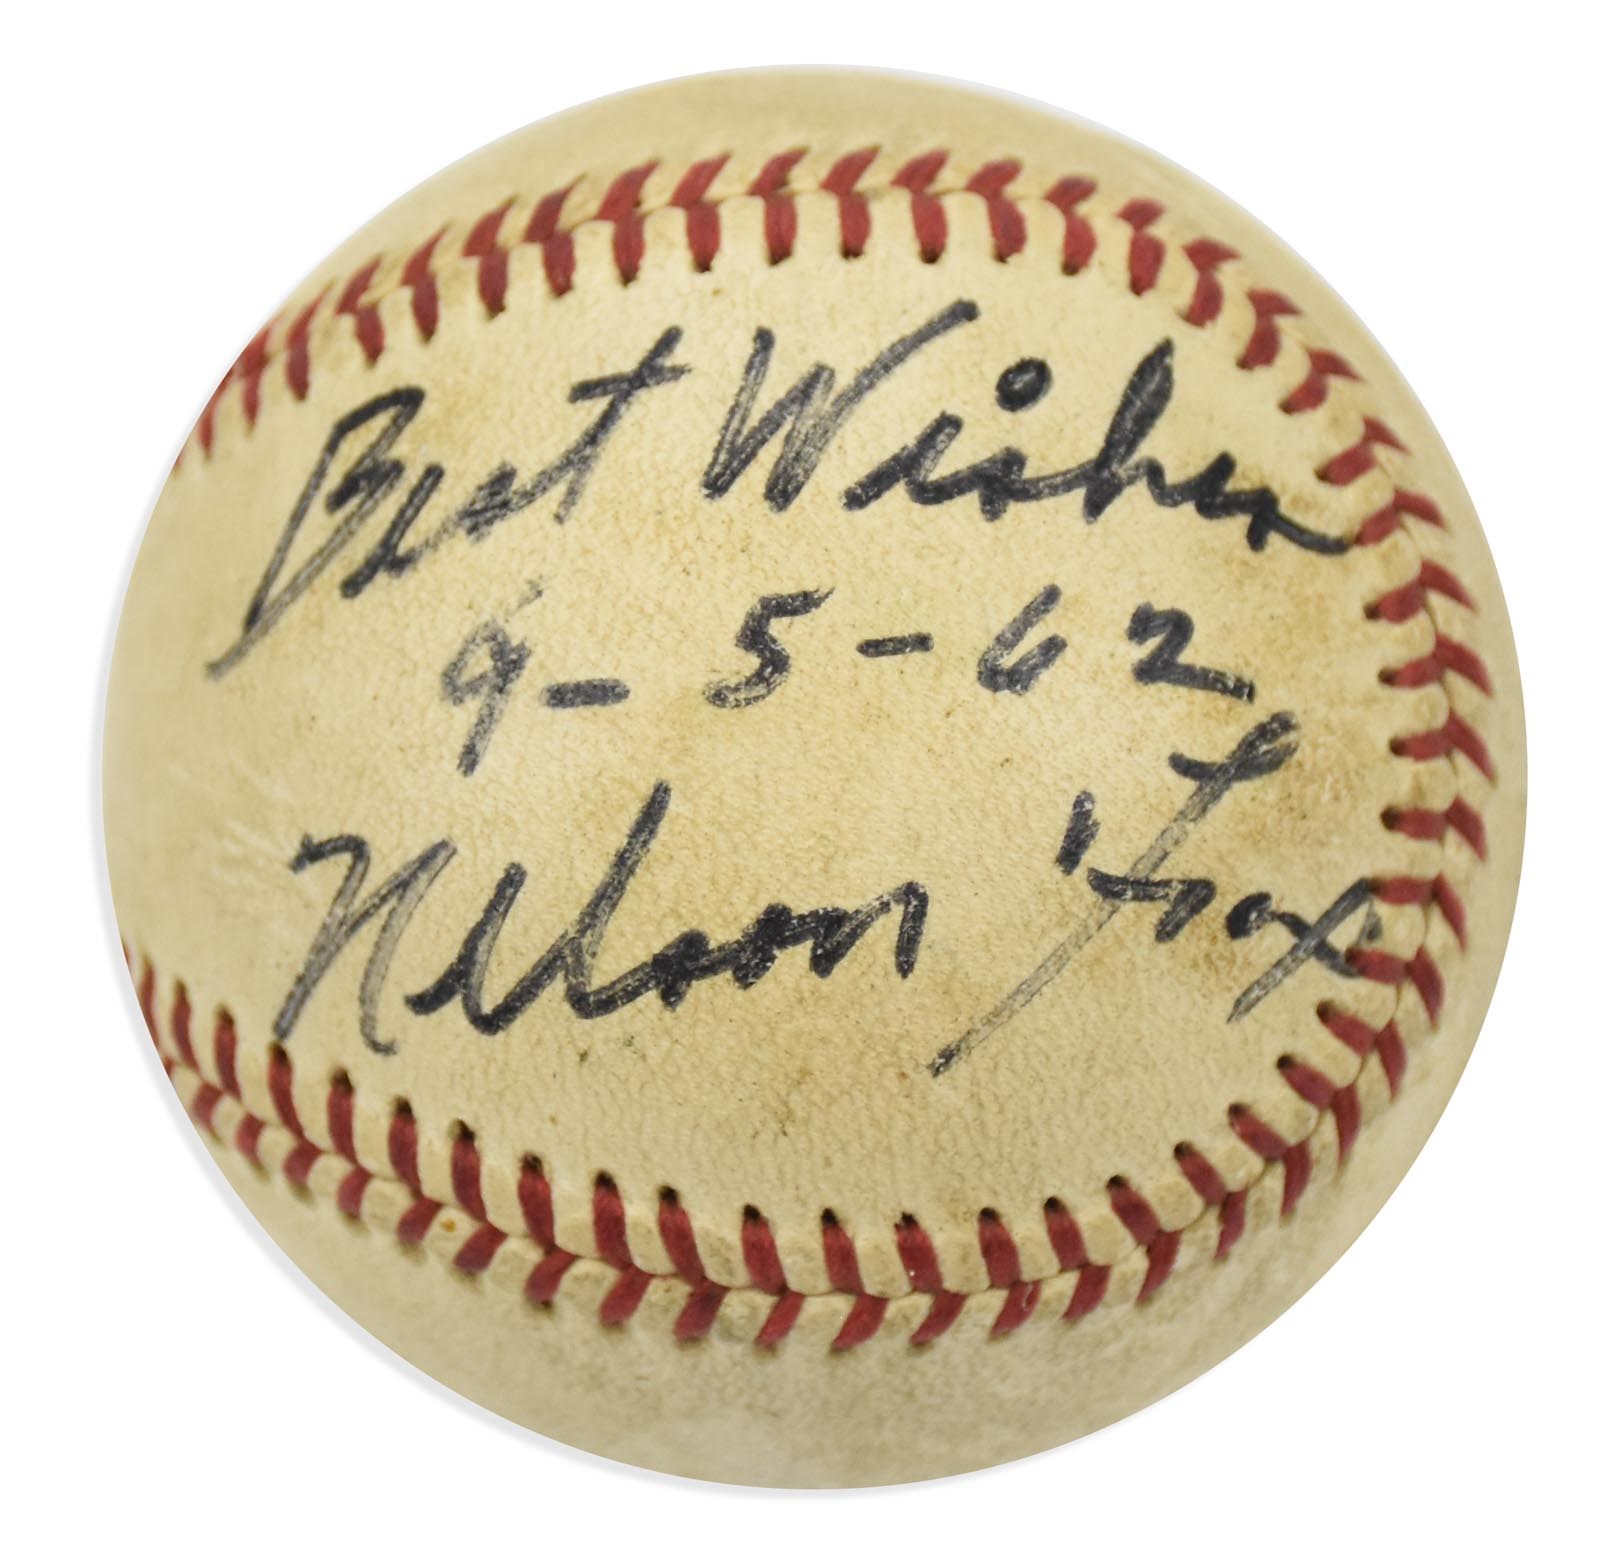 Baseball Autographs - 9/5/62 Nellie Fox Single Signed Game Used Baseball - with Game Ticket (PSA)